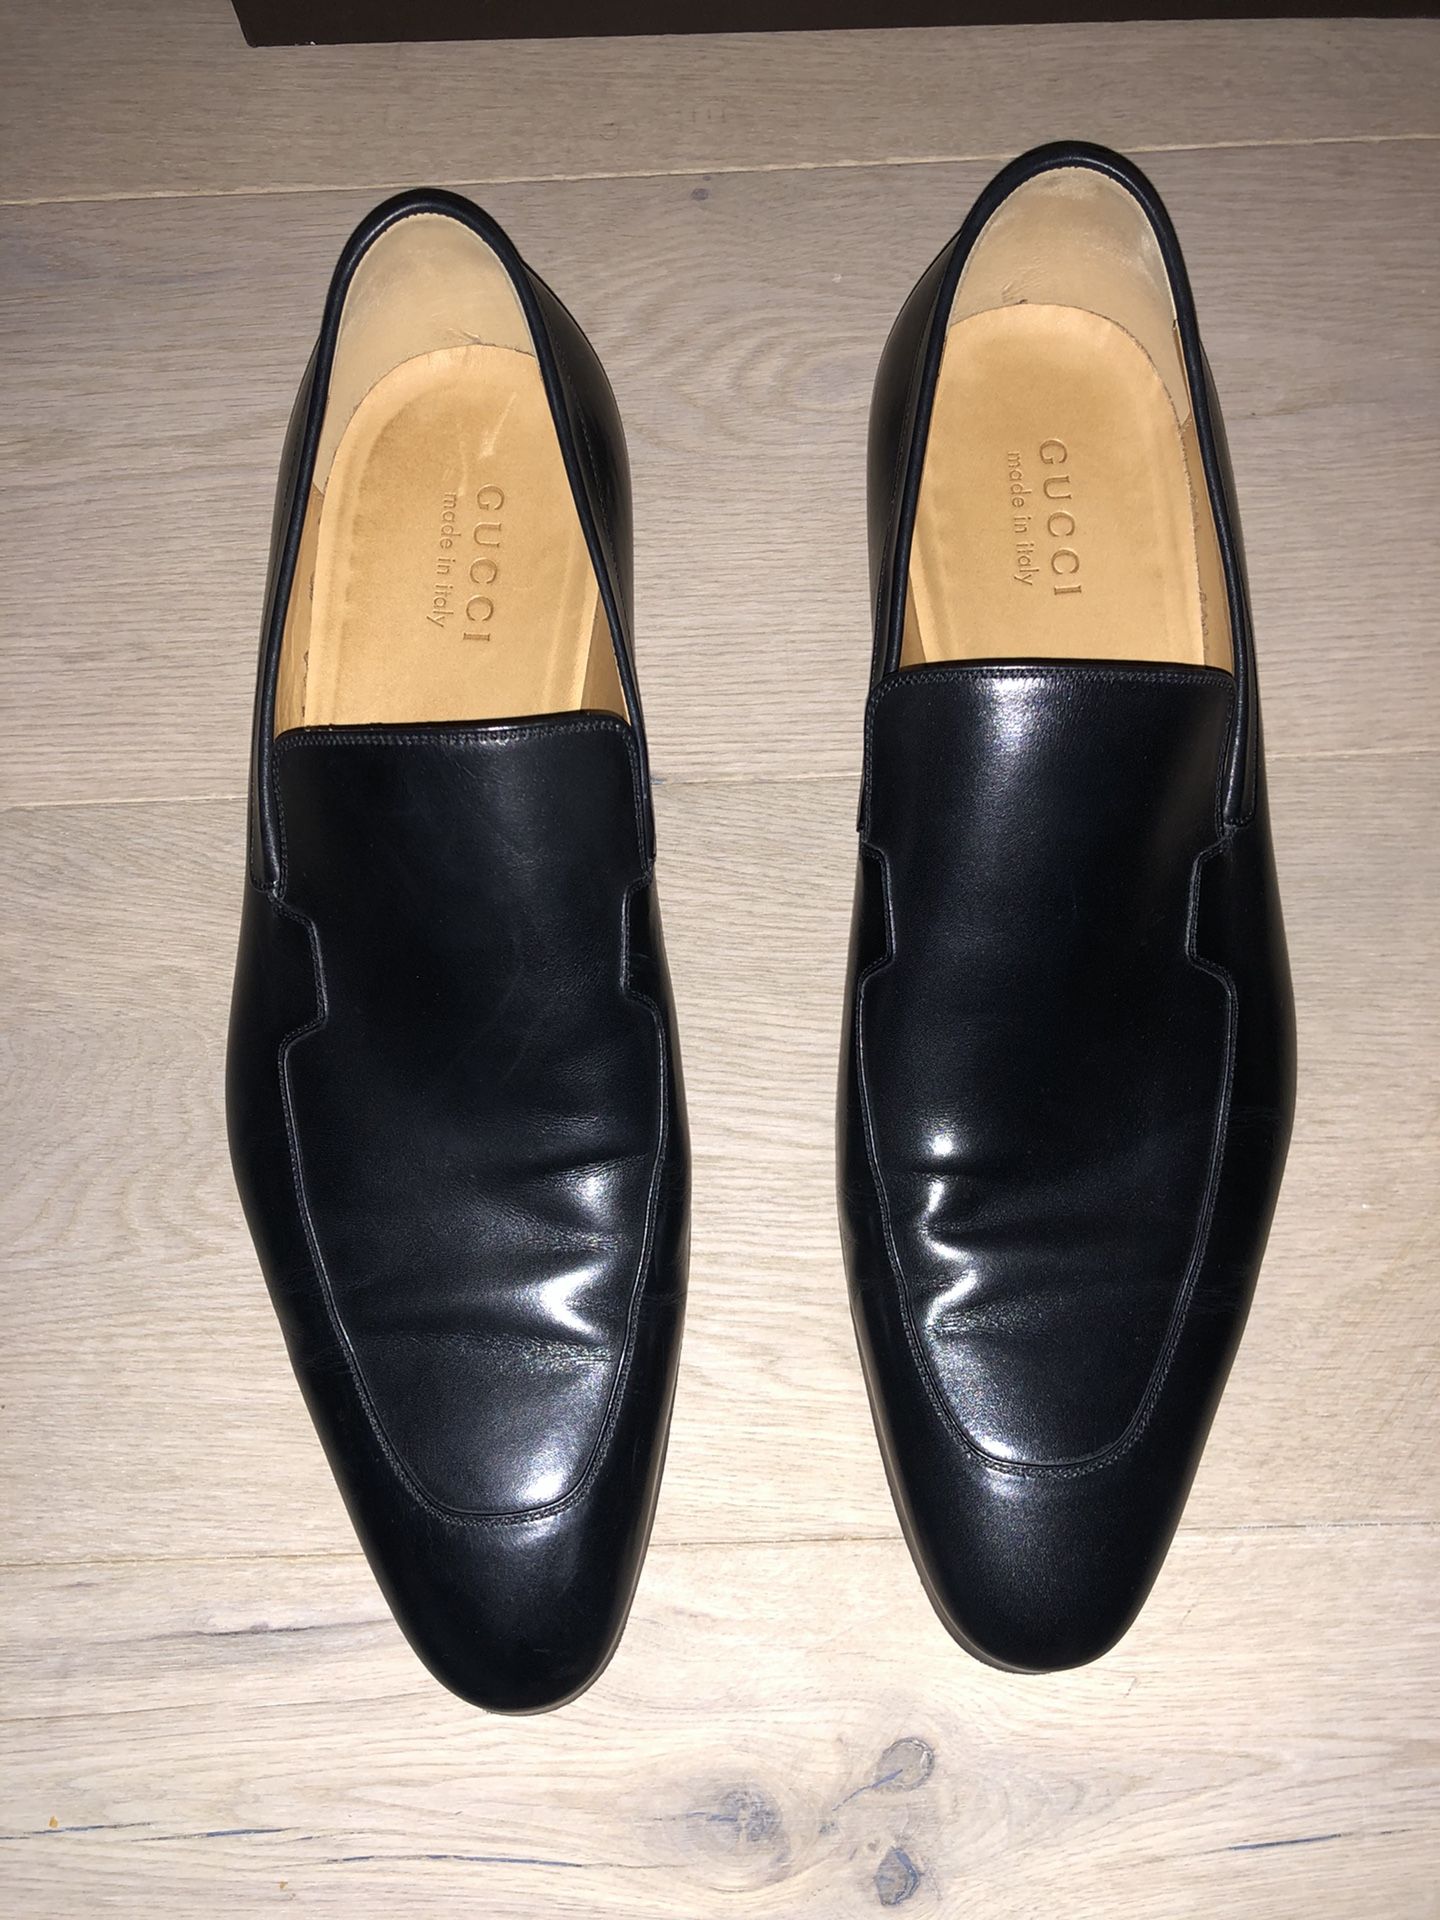 Gucci men loafers authentic size 11 1/2